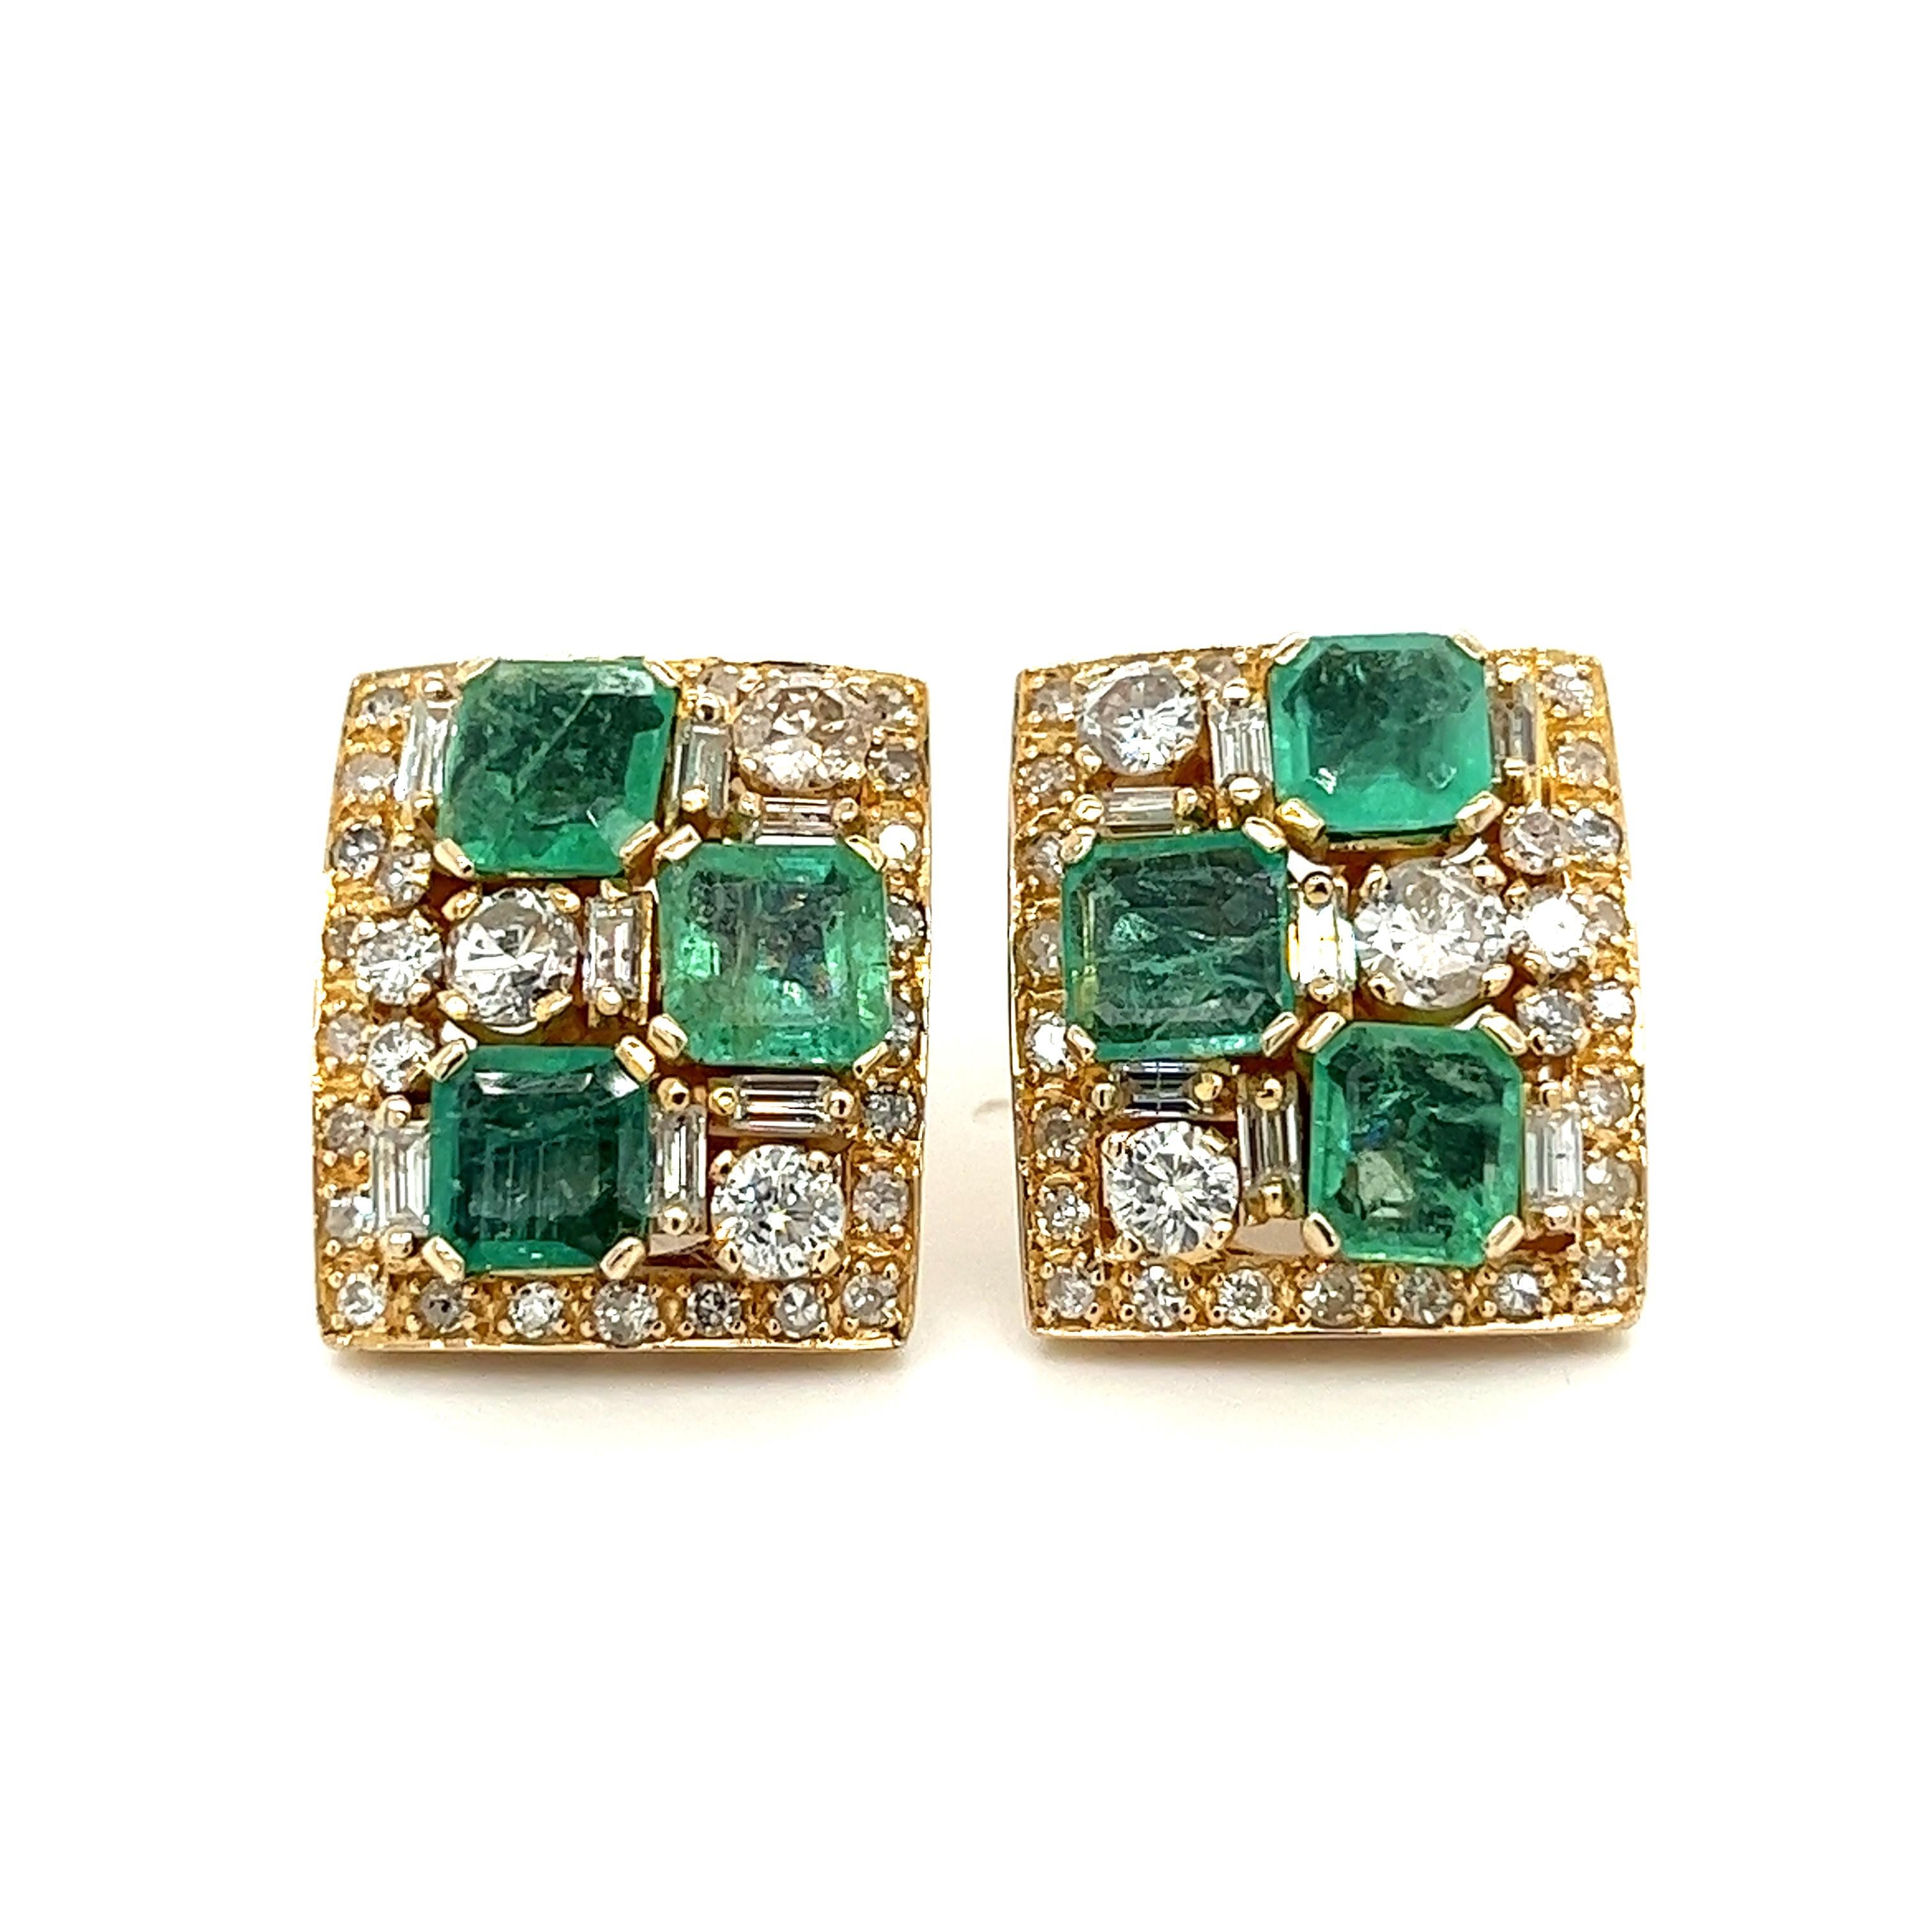 Emerald Cut Vintage Natural Emerald & Diamond Earring and Ring Jewelry Set in 18k Gold For Sale